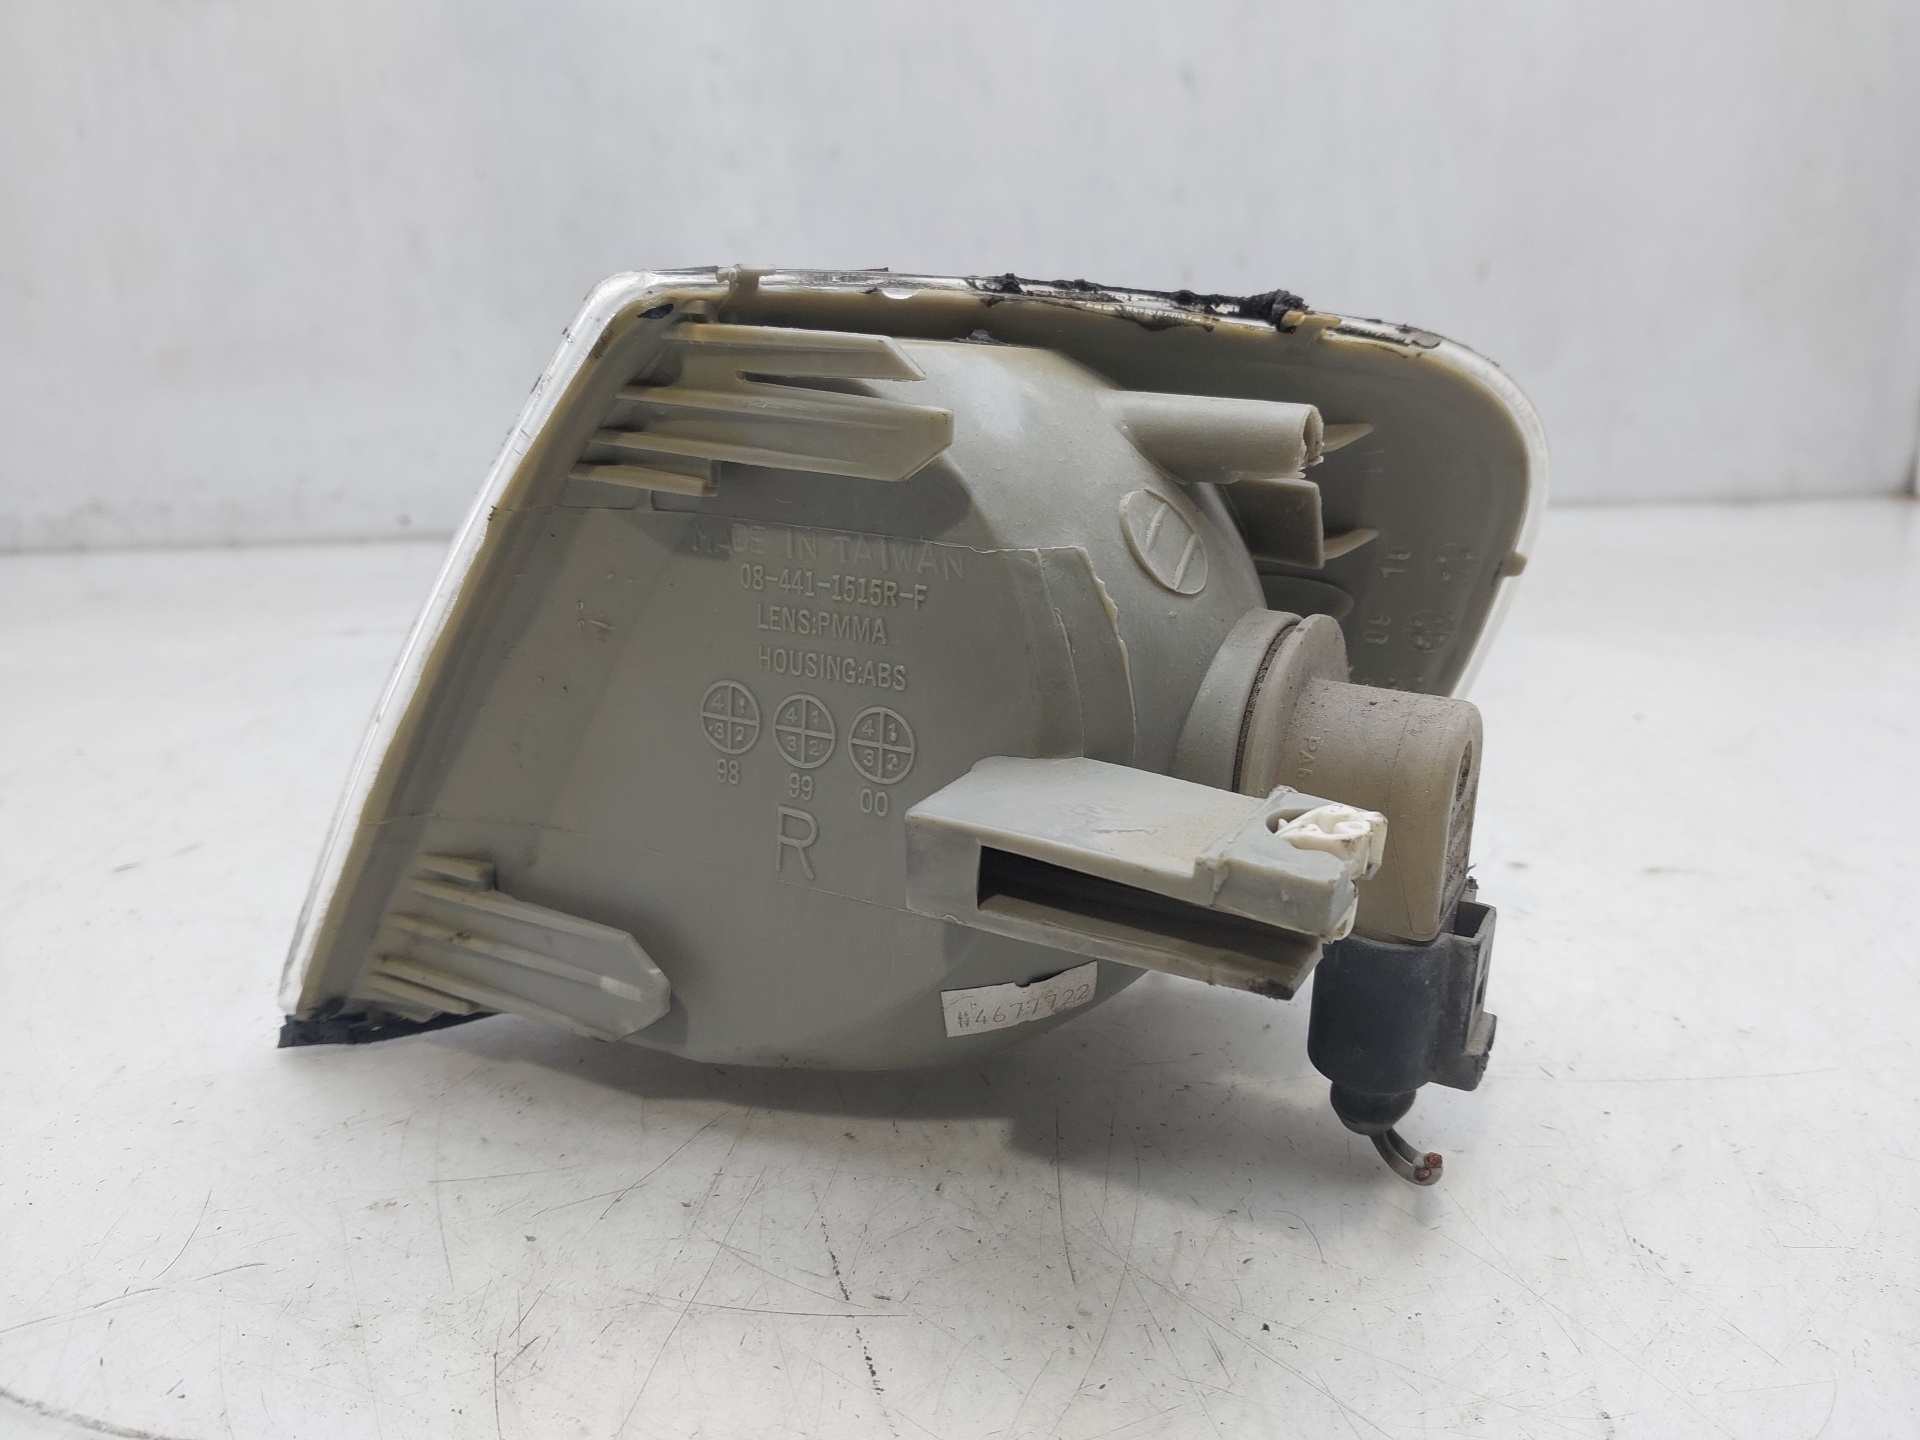 AUDI Spider 916 (1995-2006) Front Right Fender Turn Signal 8L0953050 24851587